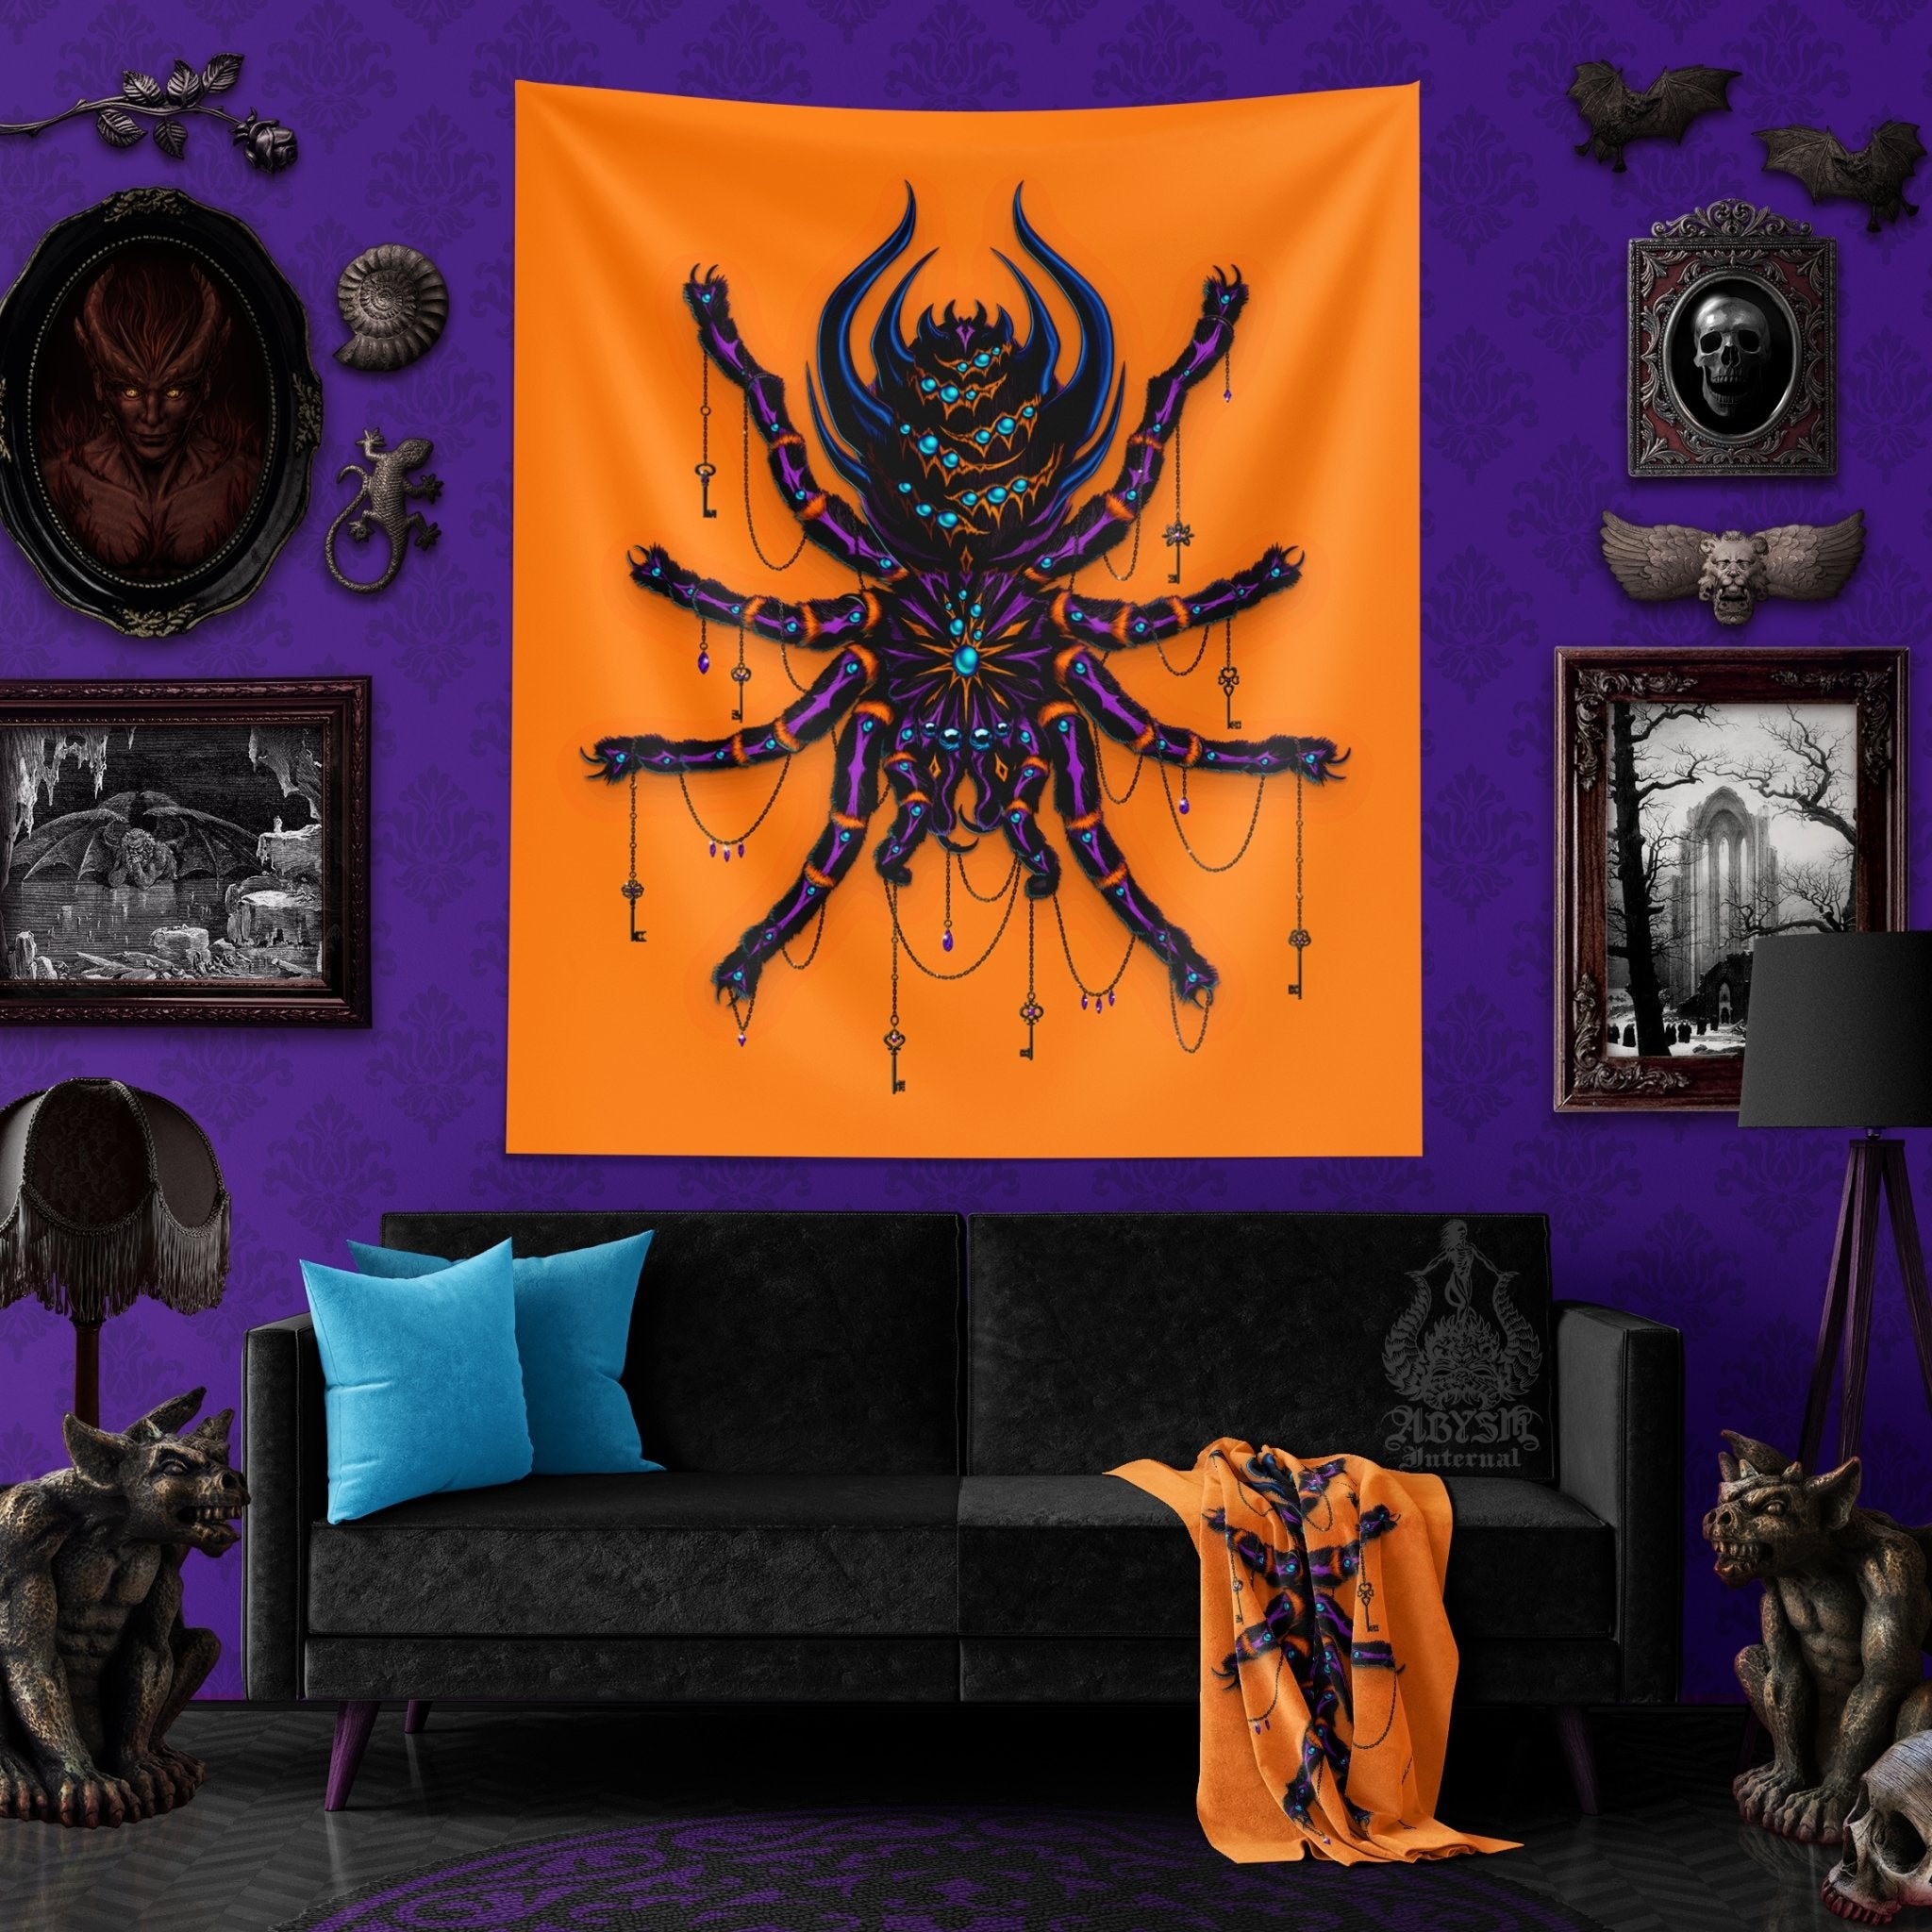 Spider Tapestry, Indie Wall Hanging, Alternative Home Decor, Tarantula Art Print, Eclectic and Funky - Neon Goth - Abysm Internal